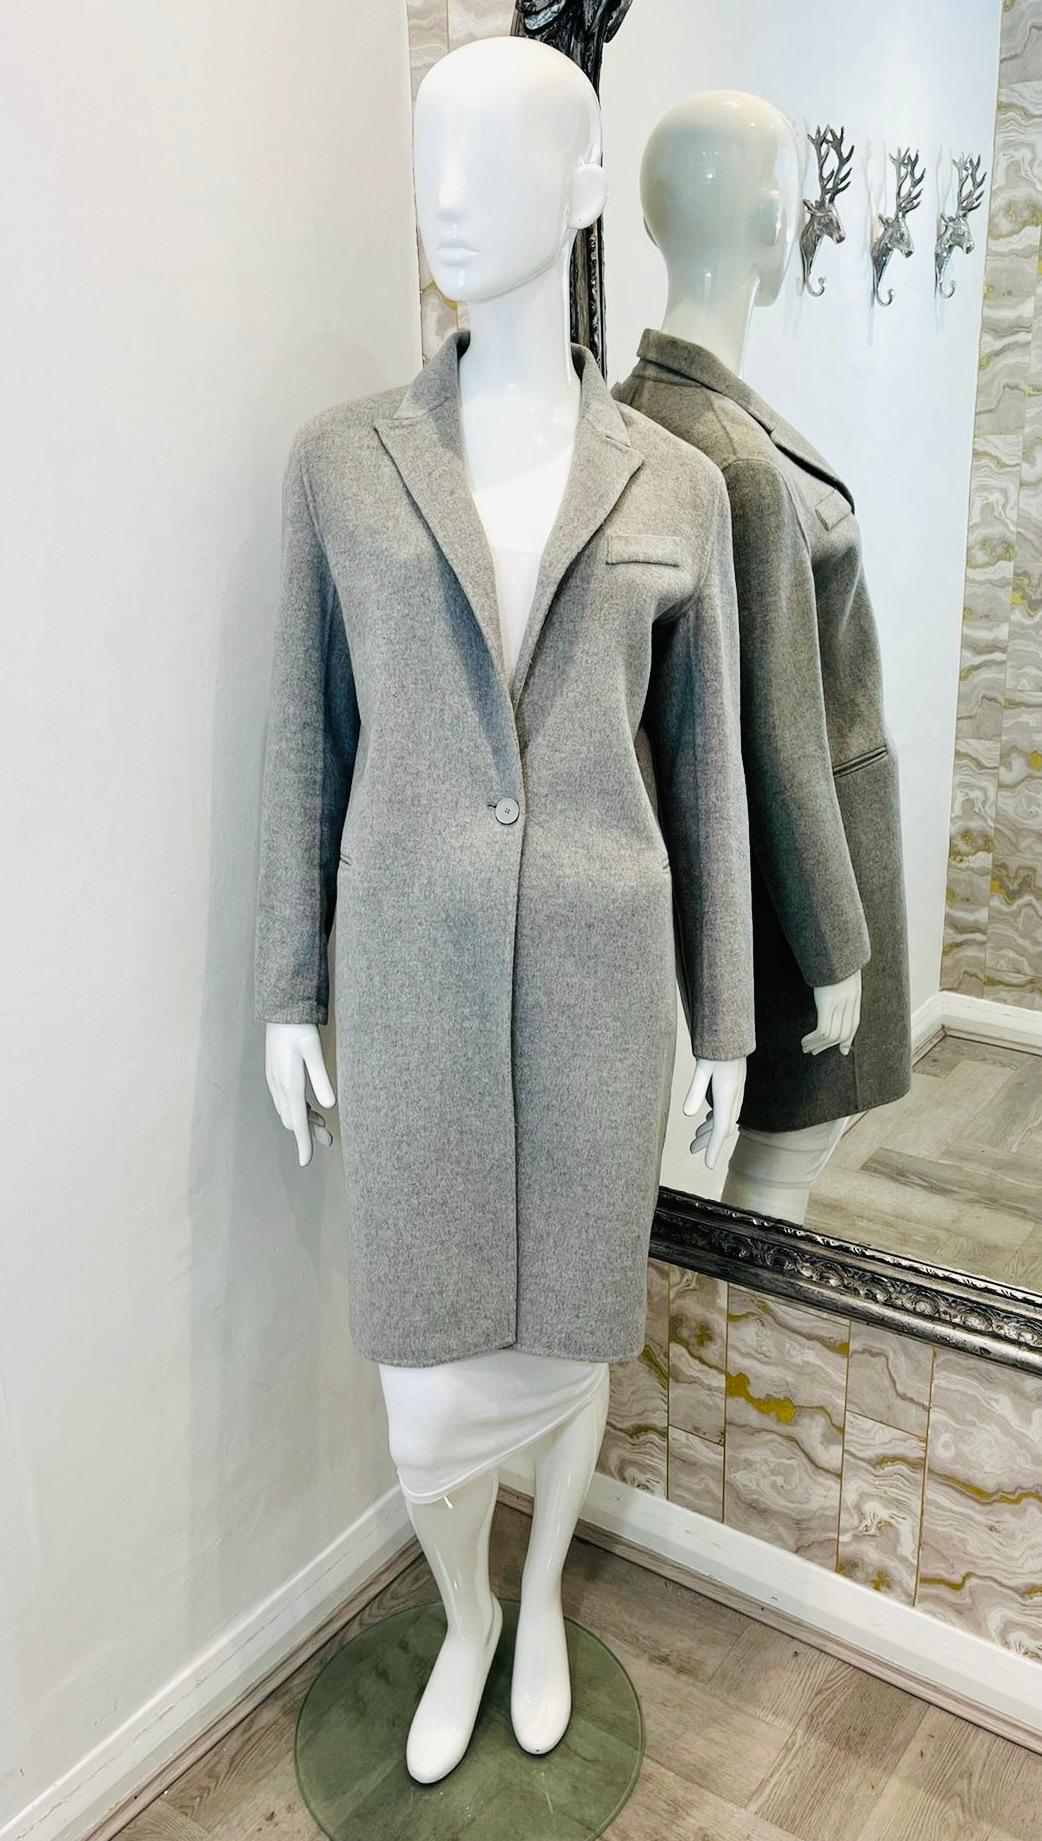 Sandro Wool Coat

Single breasted grey coat styled with three pocket design.

Featuring notched lapels and above-the-knee length.

Size –  38FR

Condition – Very Good

Composition – 80% Wool, 20% Polyester